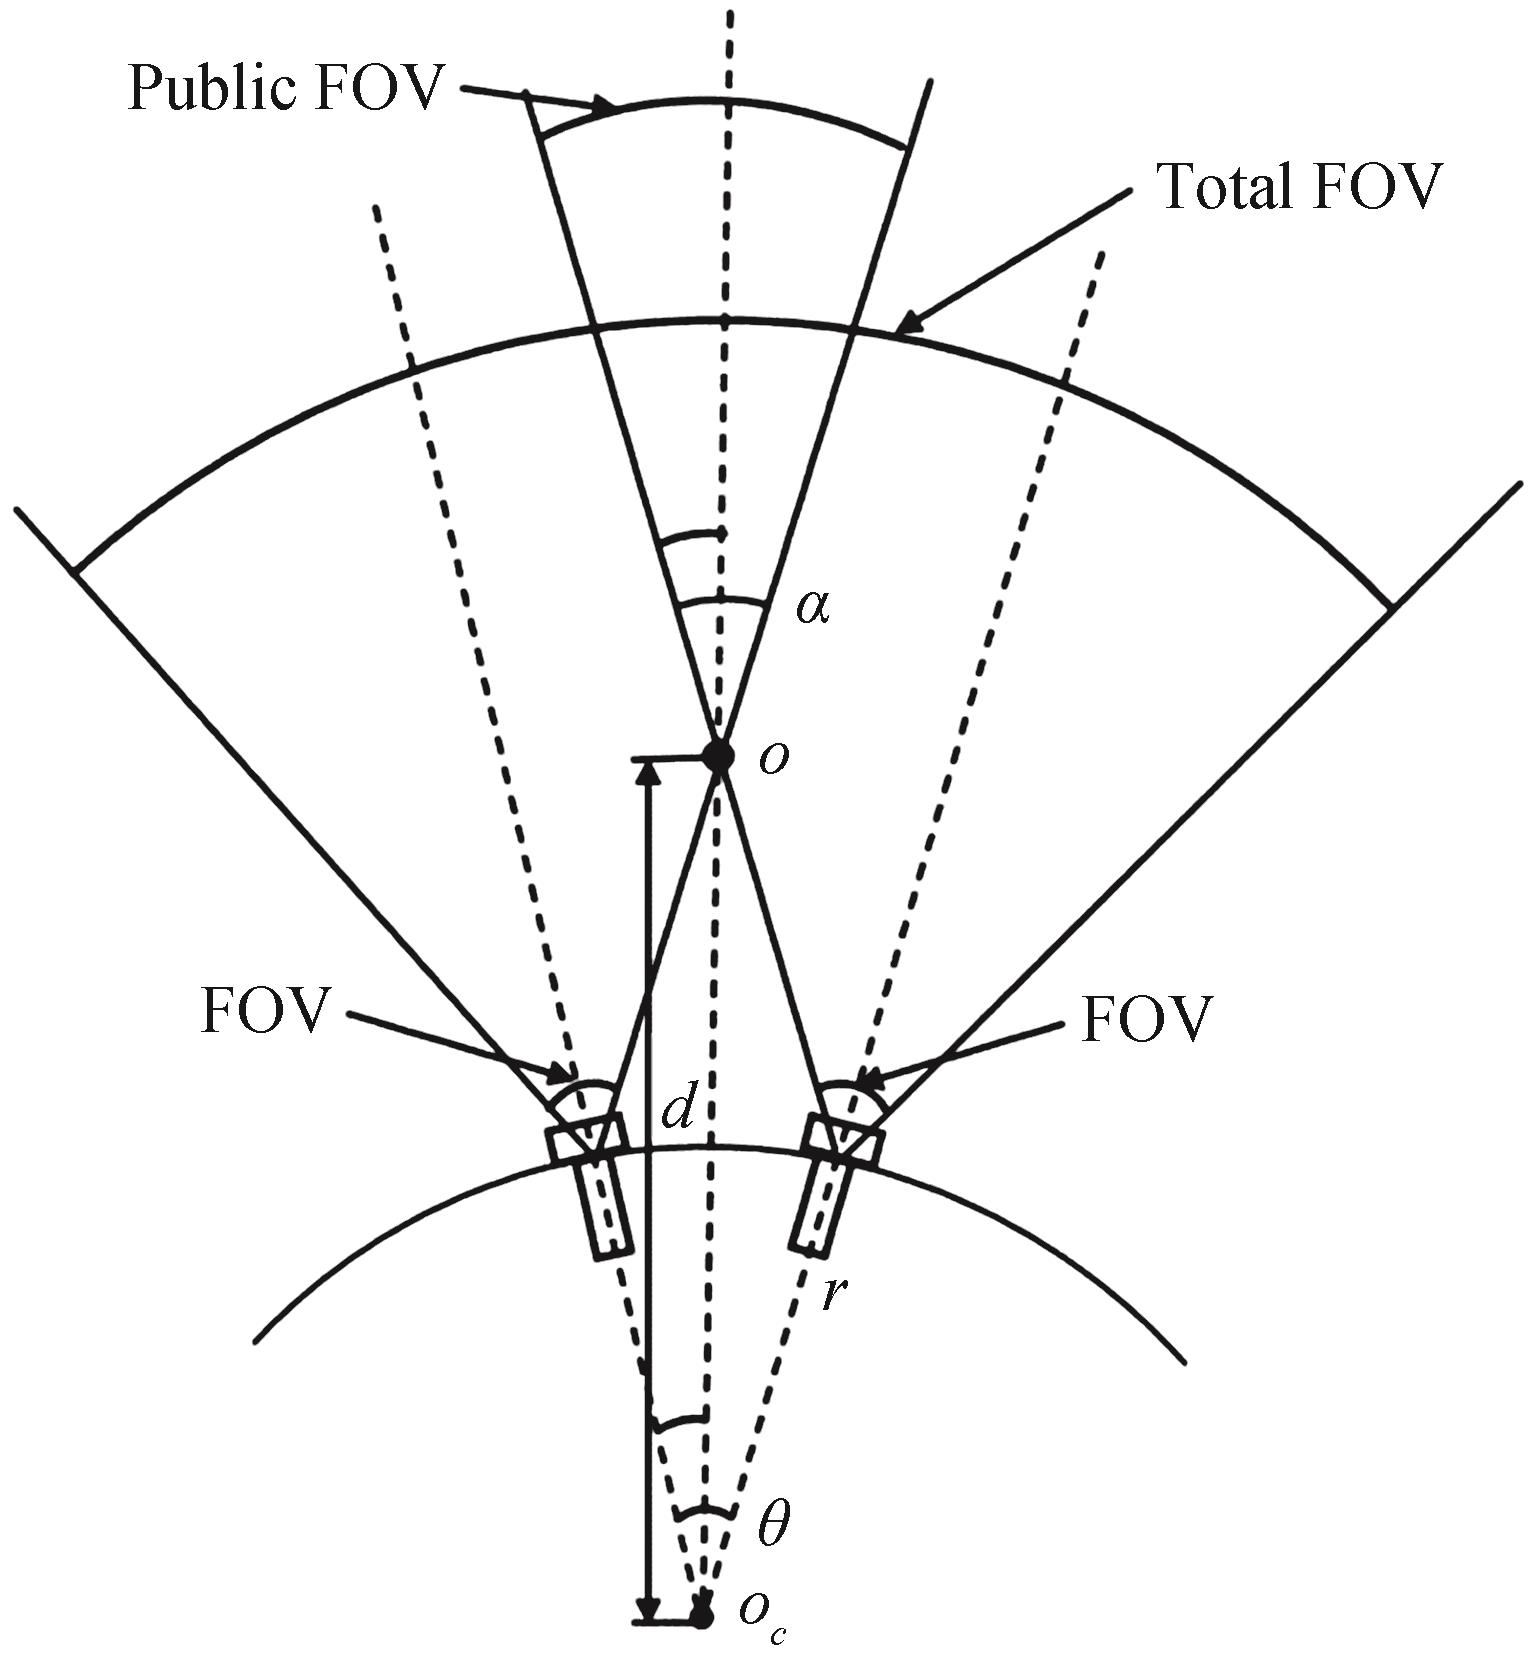 Schematic diagram of the common field of view and total field of view of two sub-eyes arranged on the same spherical surface